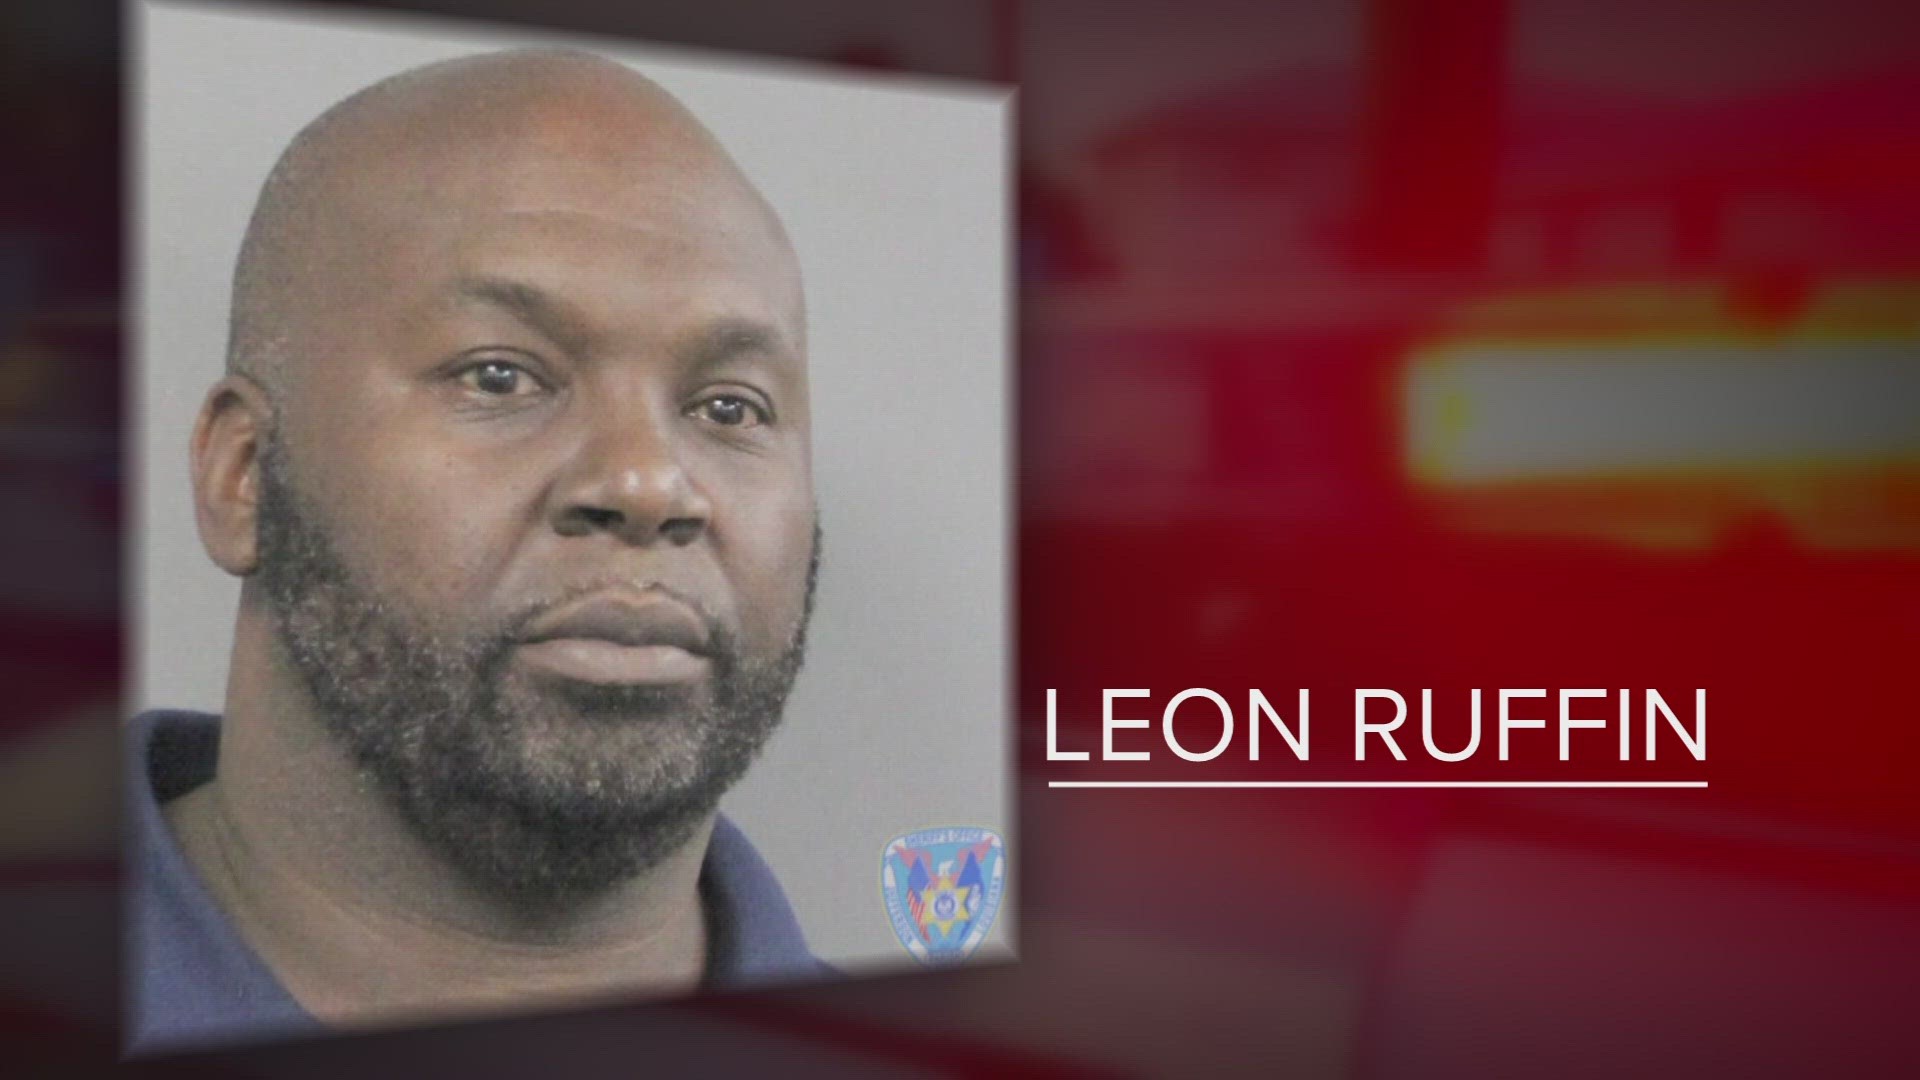 Ruffin was serving a sentence for second-degree murder and other offenses, according to Lopinto.